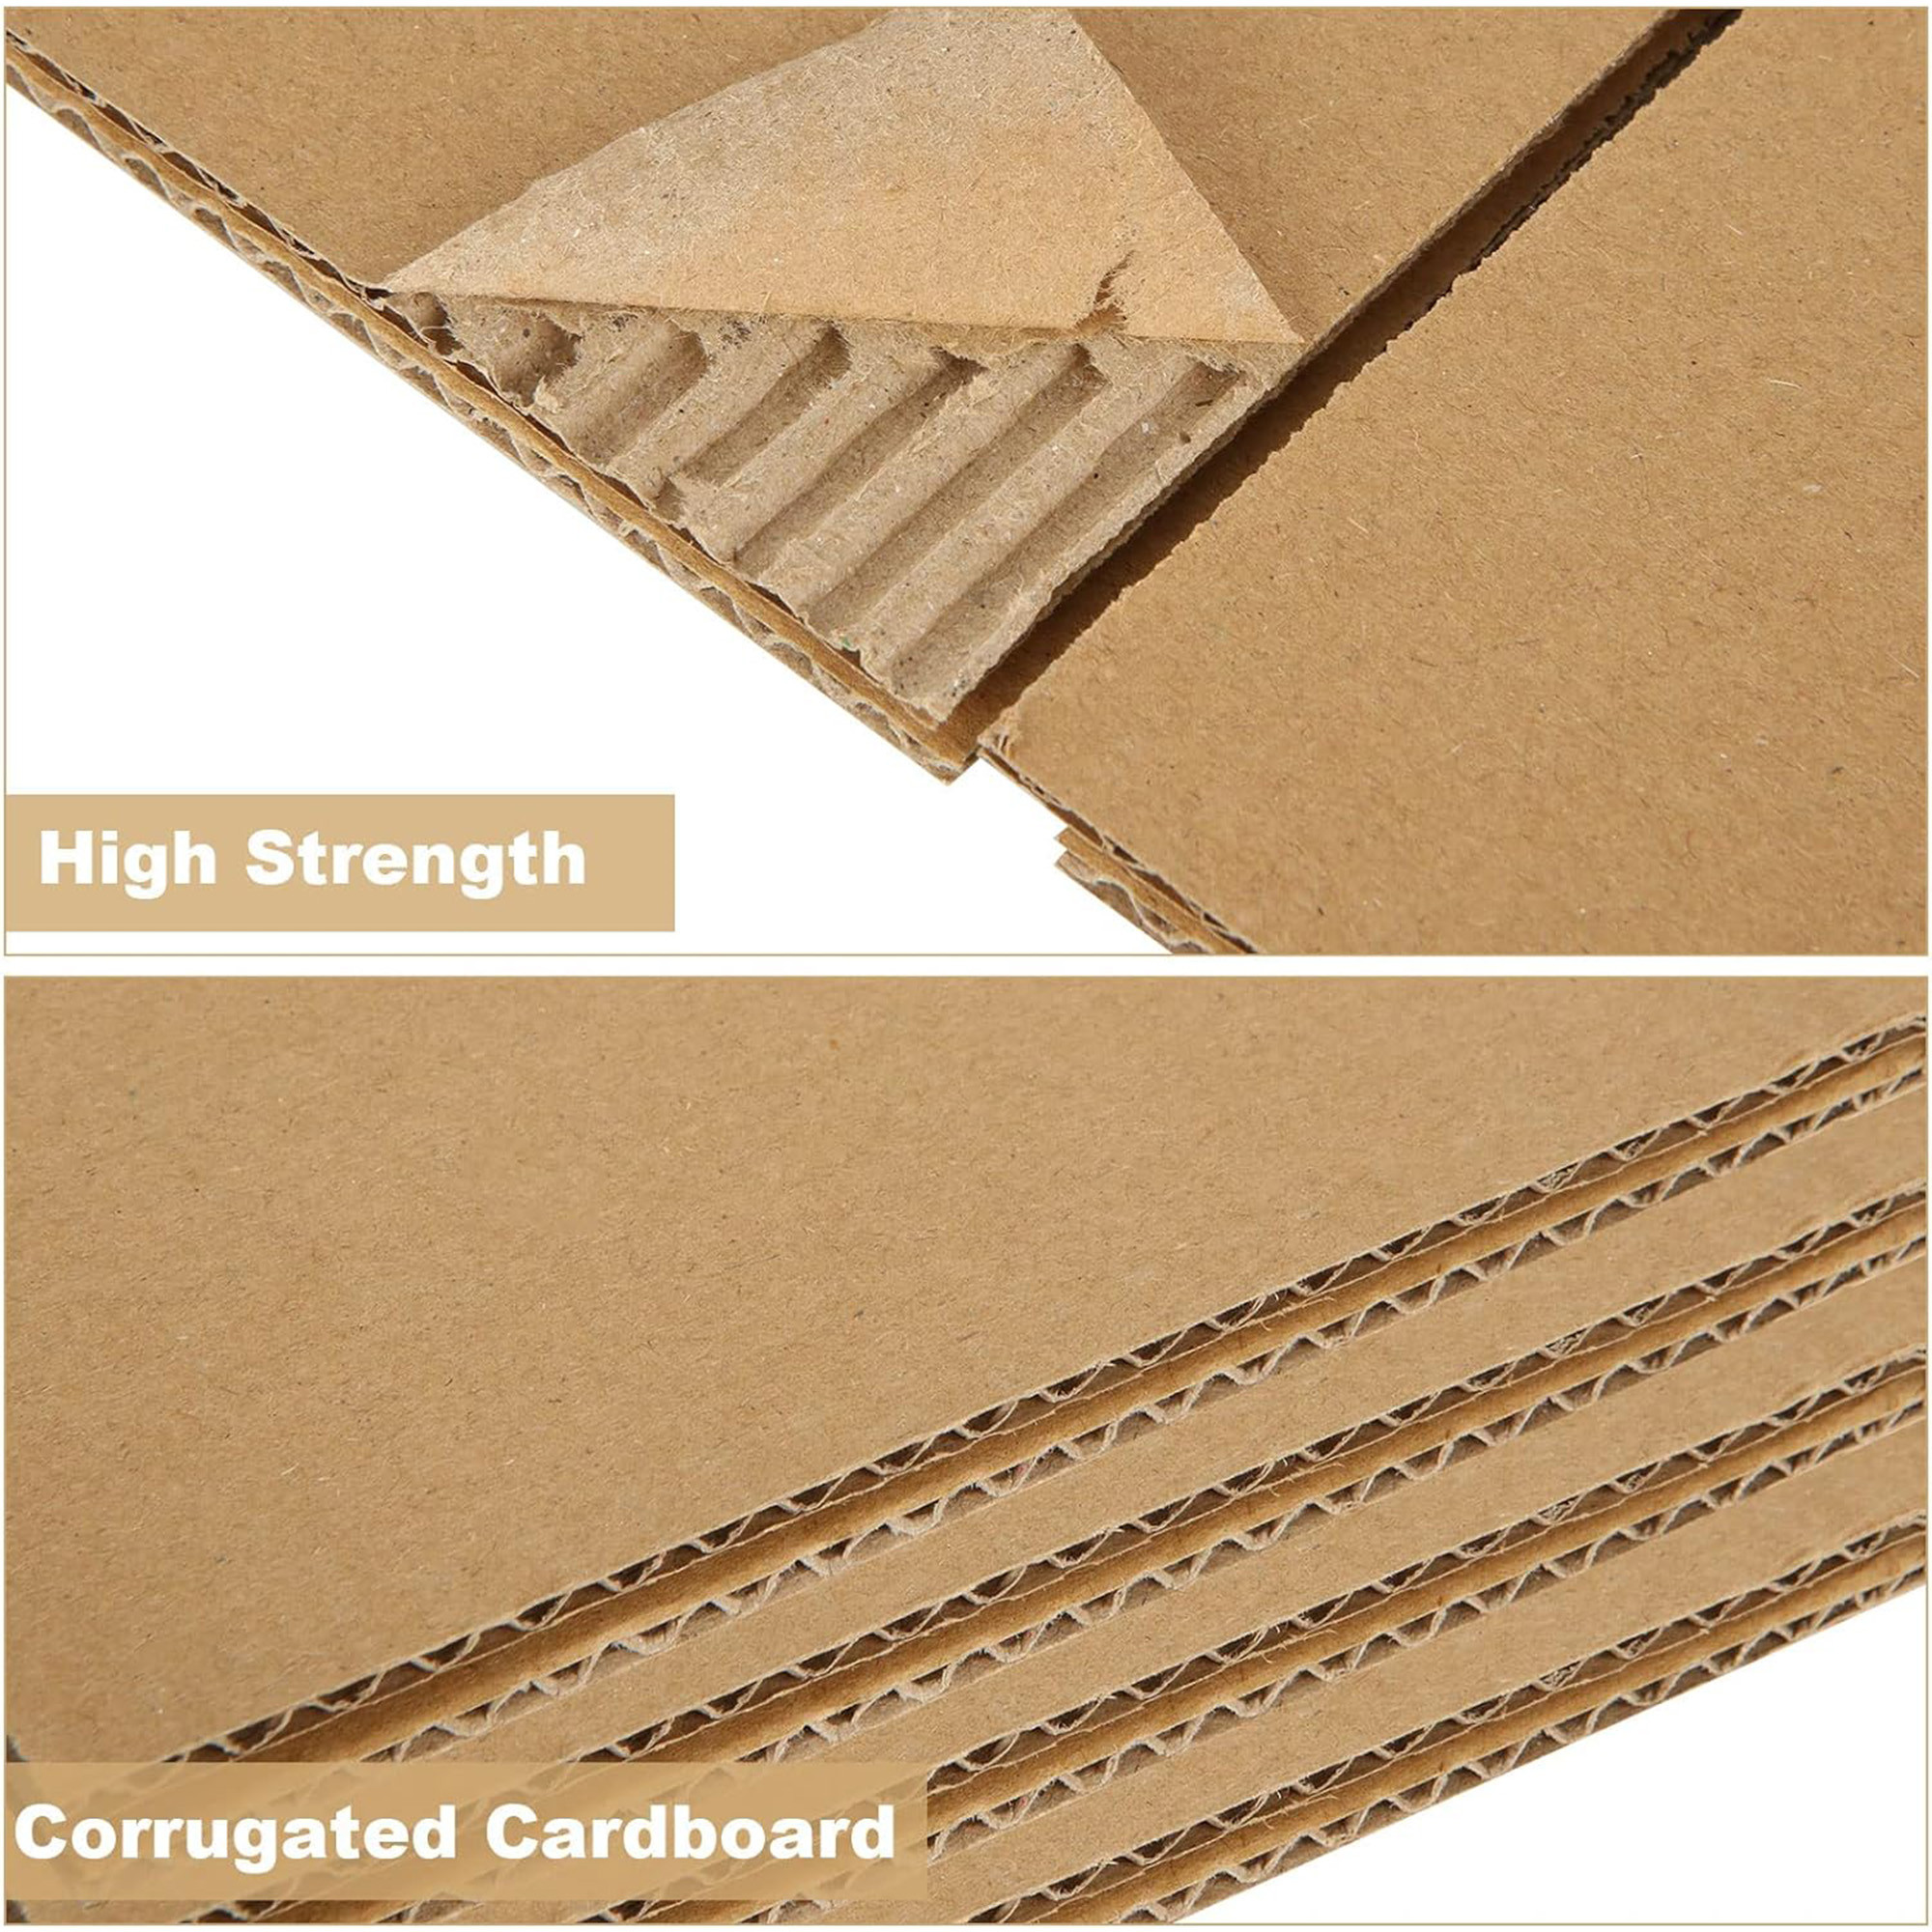 Kuber Industries Corrugated Box | 3 Ply Corrugated Packing Box | Corrugated for Shipping | Corrugated for Courier & Goods Transportation | L 17 x W 17 x H 12.7 Inch | Brown